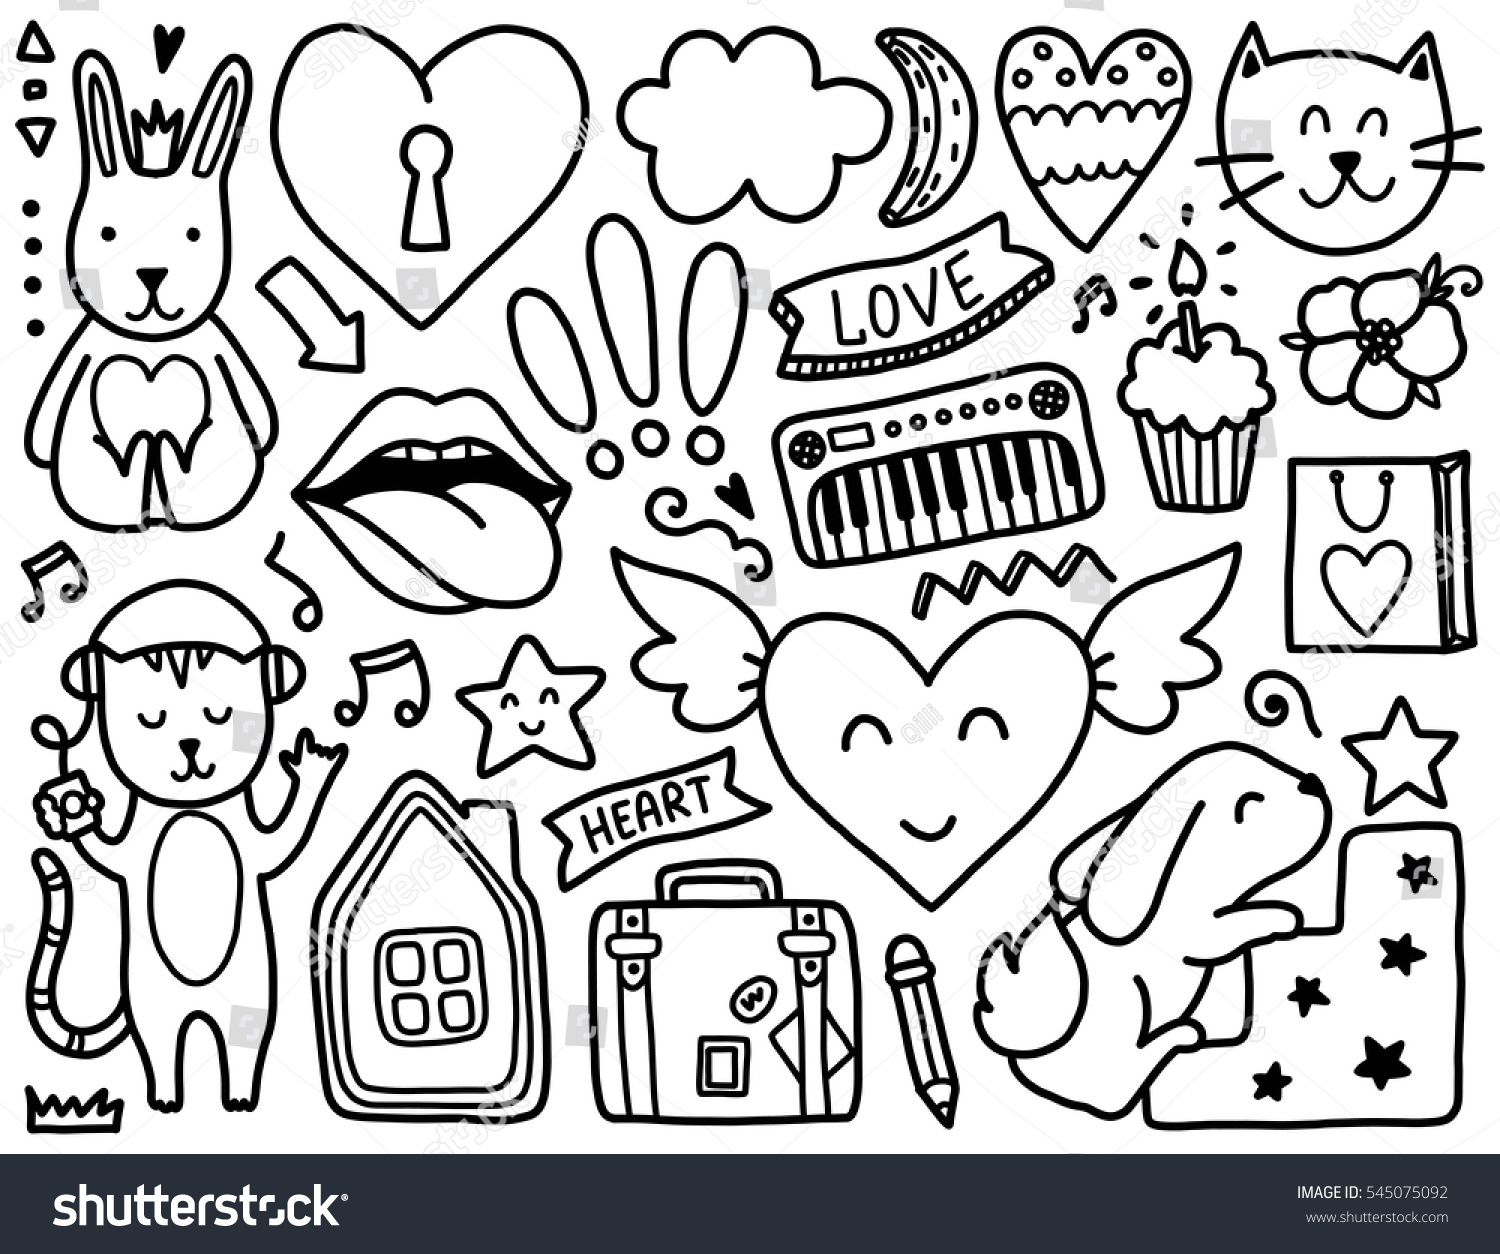 Black vector coloring page Illustration with hearts and flowers animals